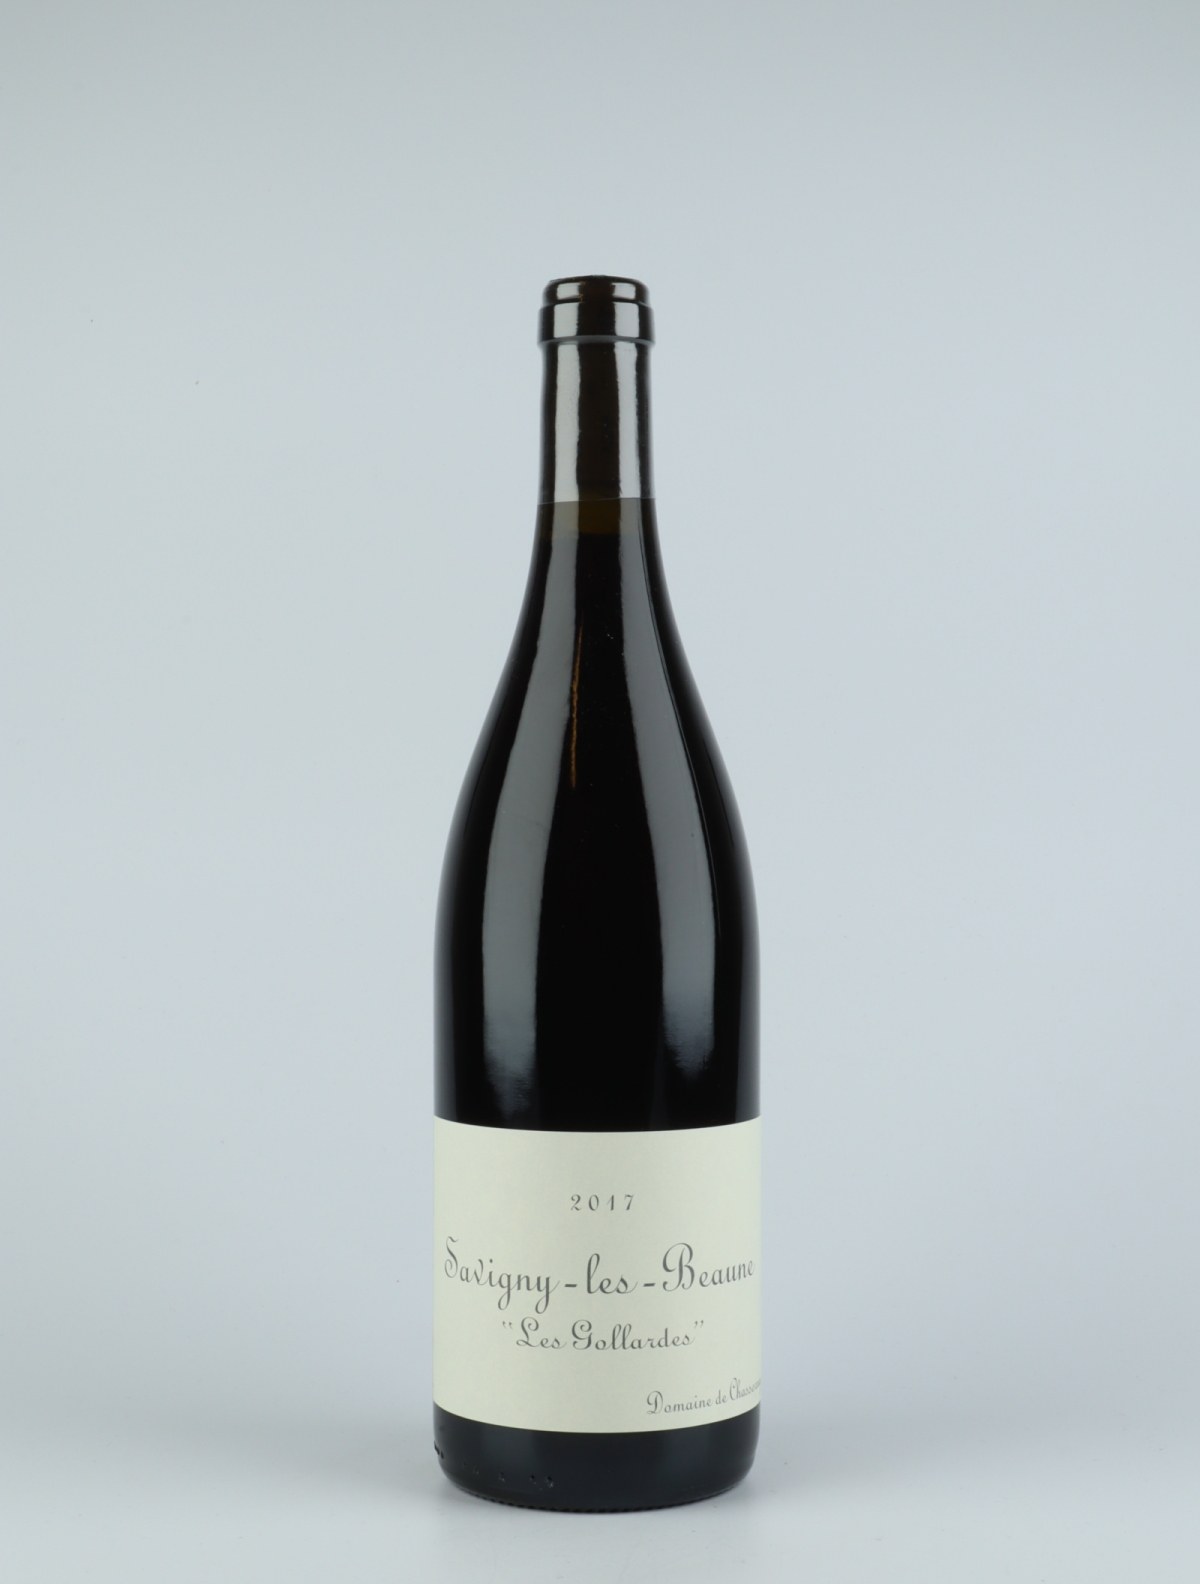 A bottle 2017 Savigny les Beaune - Les Gollardes Red wine from Domaine de Chassorney, Burgundy in France